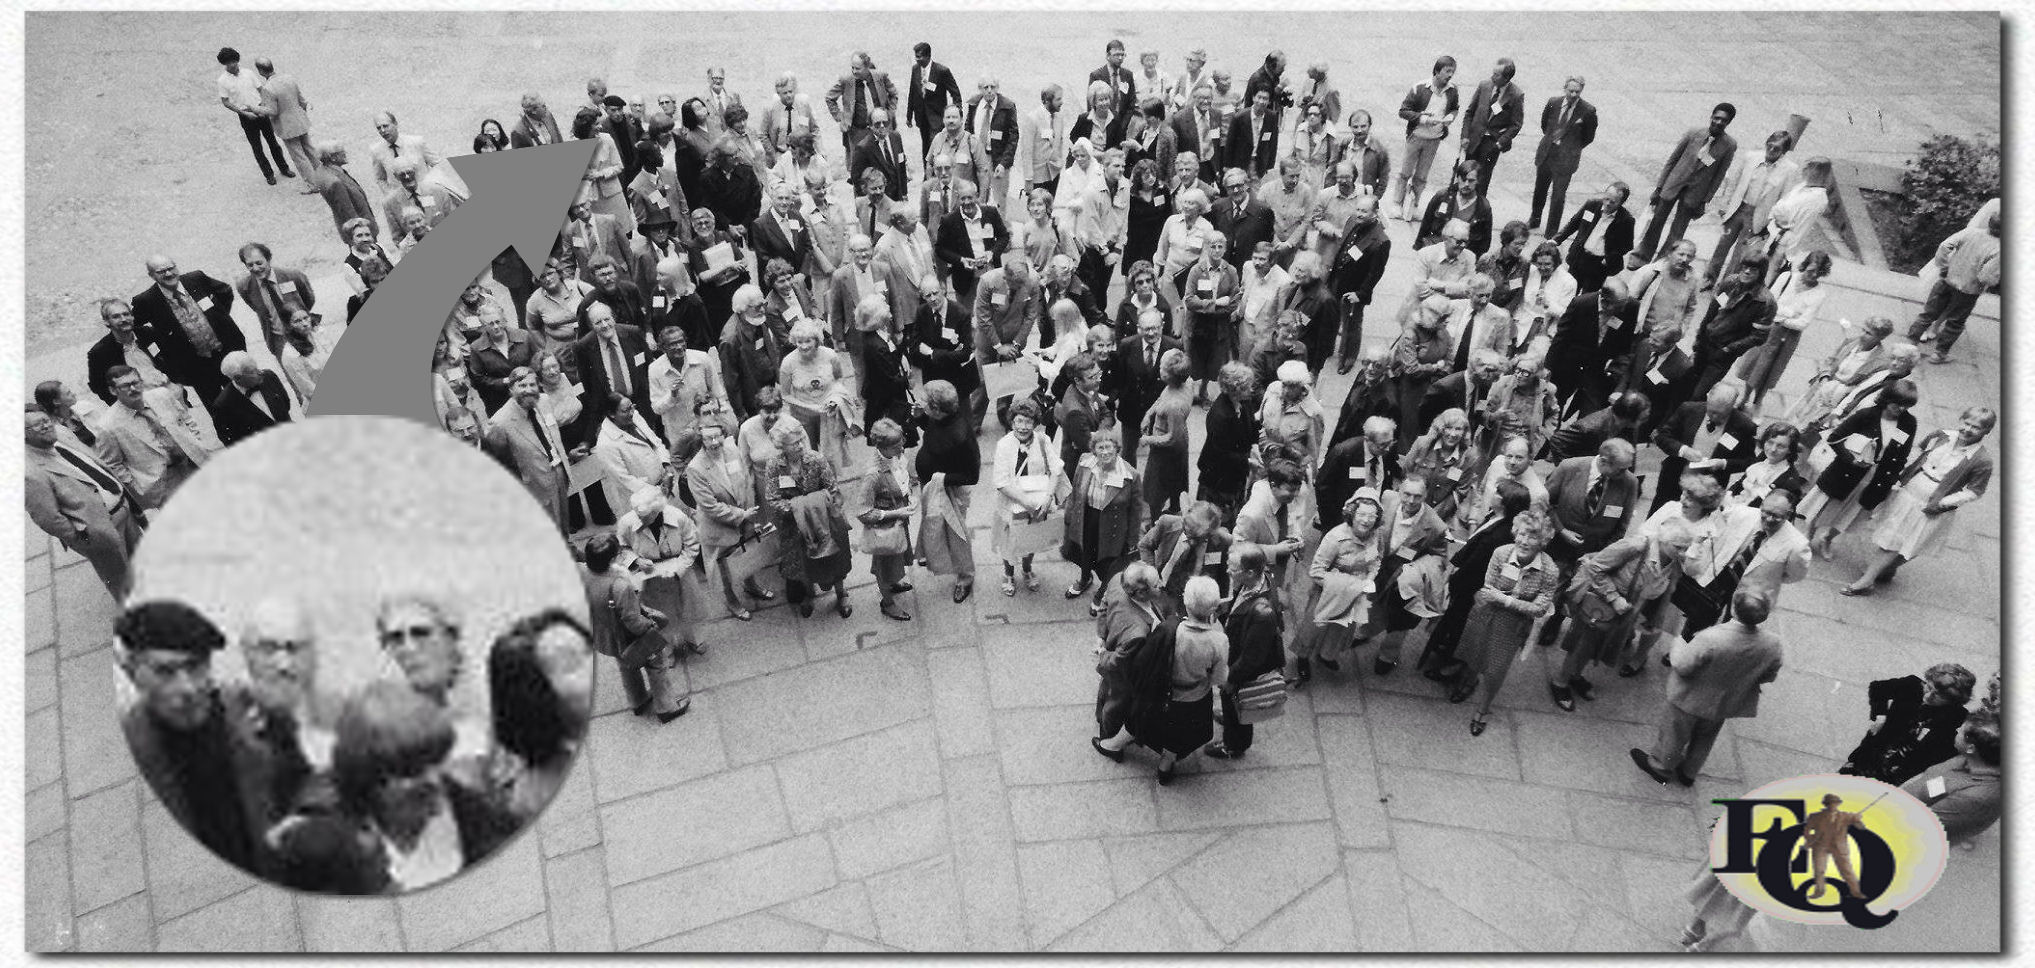 On June 15. 1981 Fred and Rose attended the third Crime Writers' International Congress which was held in Stockholm. Many detective writers attended. In the picture below of the attending writers they are just visible in the back (click on the picture for a bigger view).